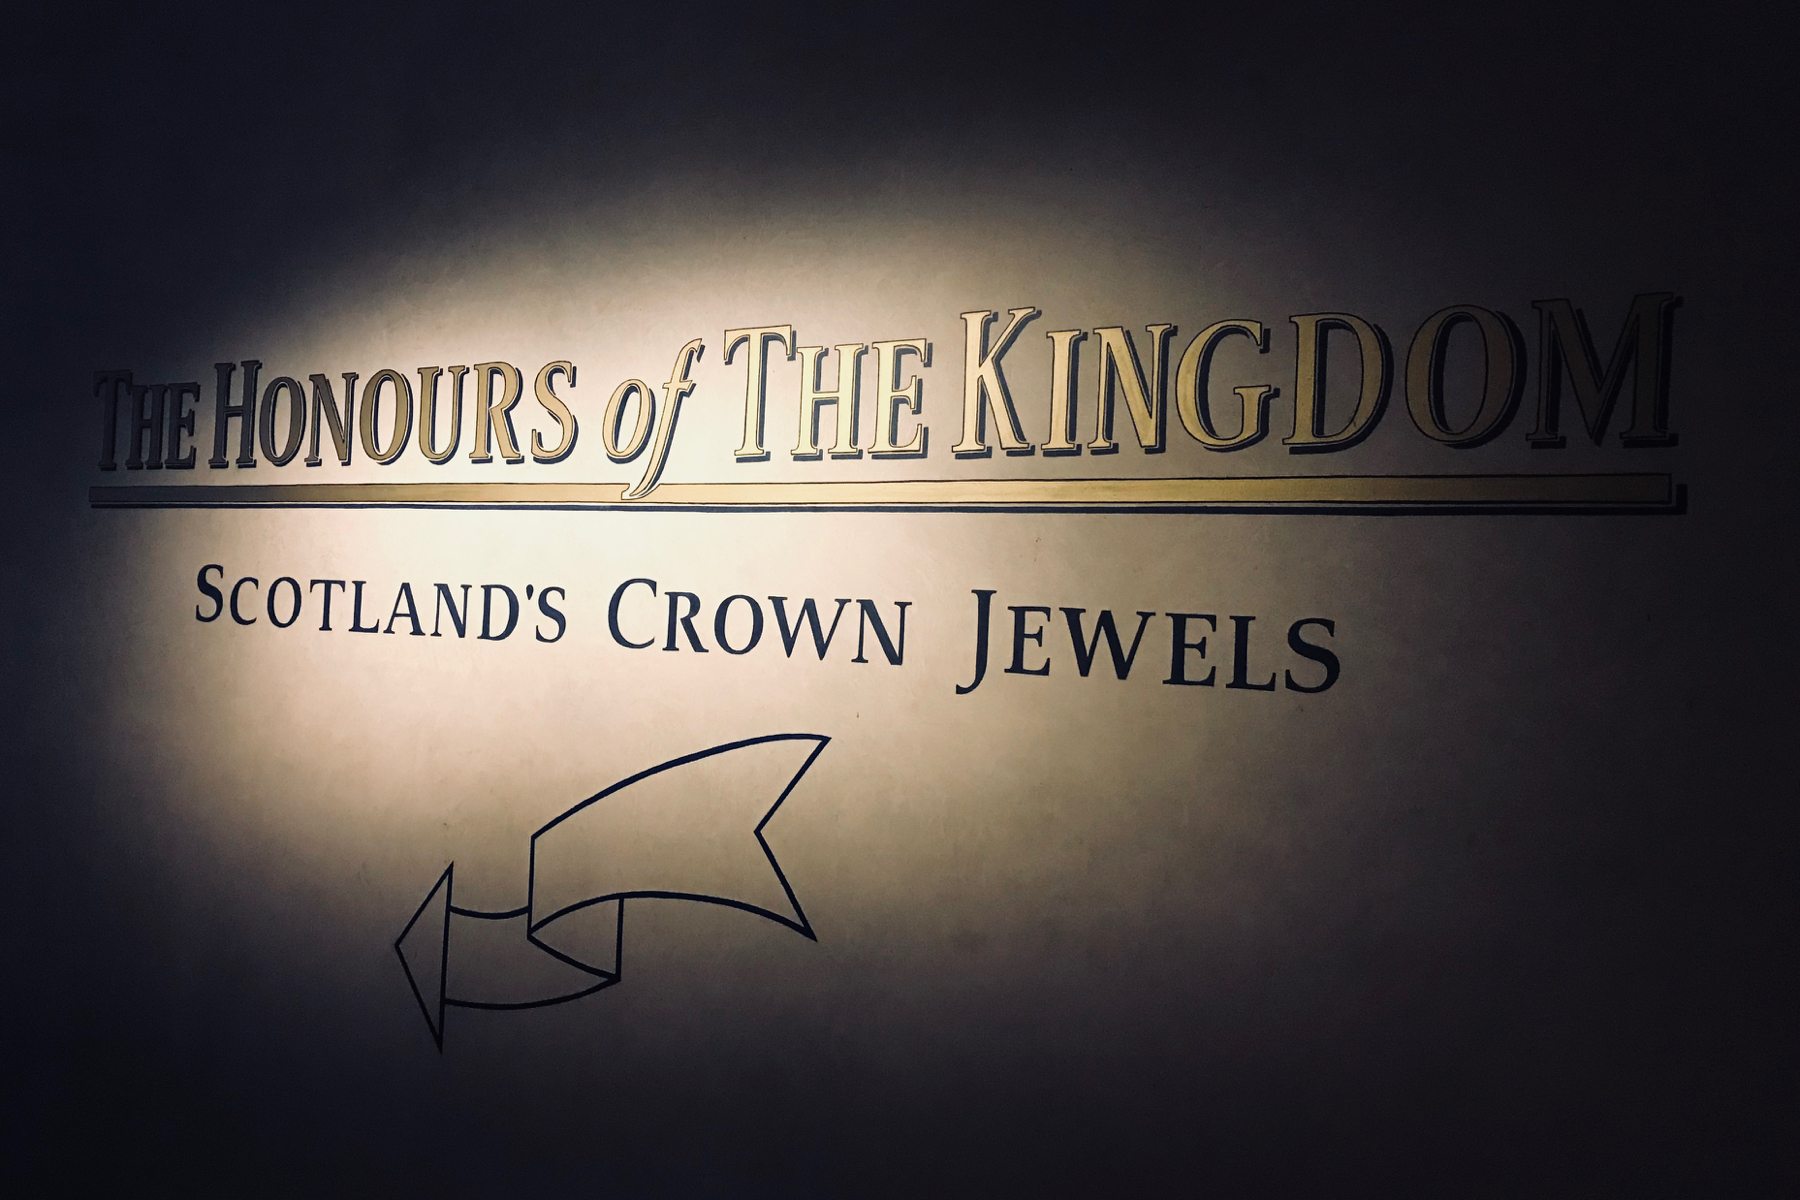 A photo of the sign leading to The Honours of The Kingdom Exhibit at Edinburgh Castle